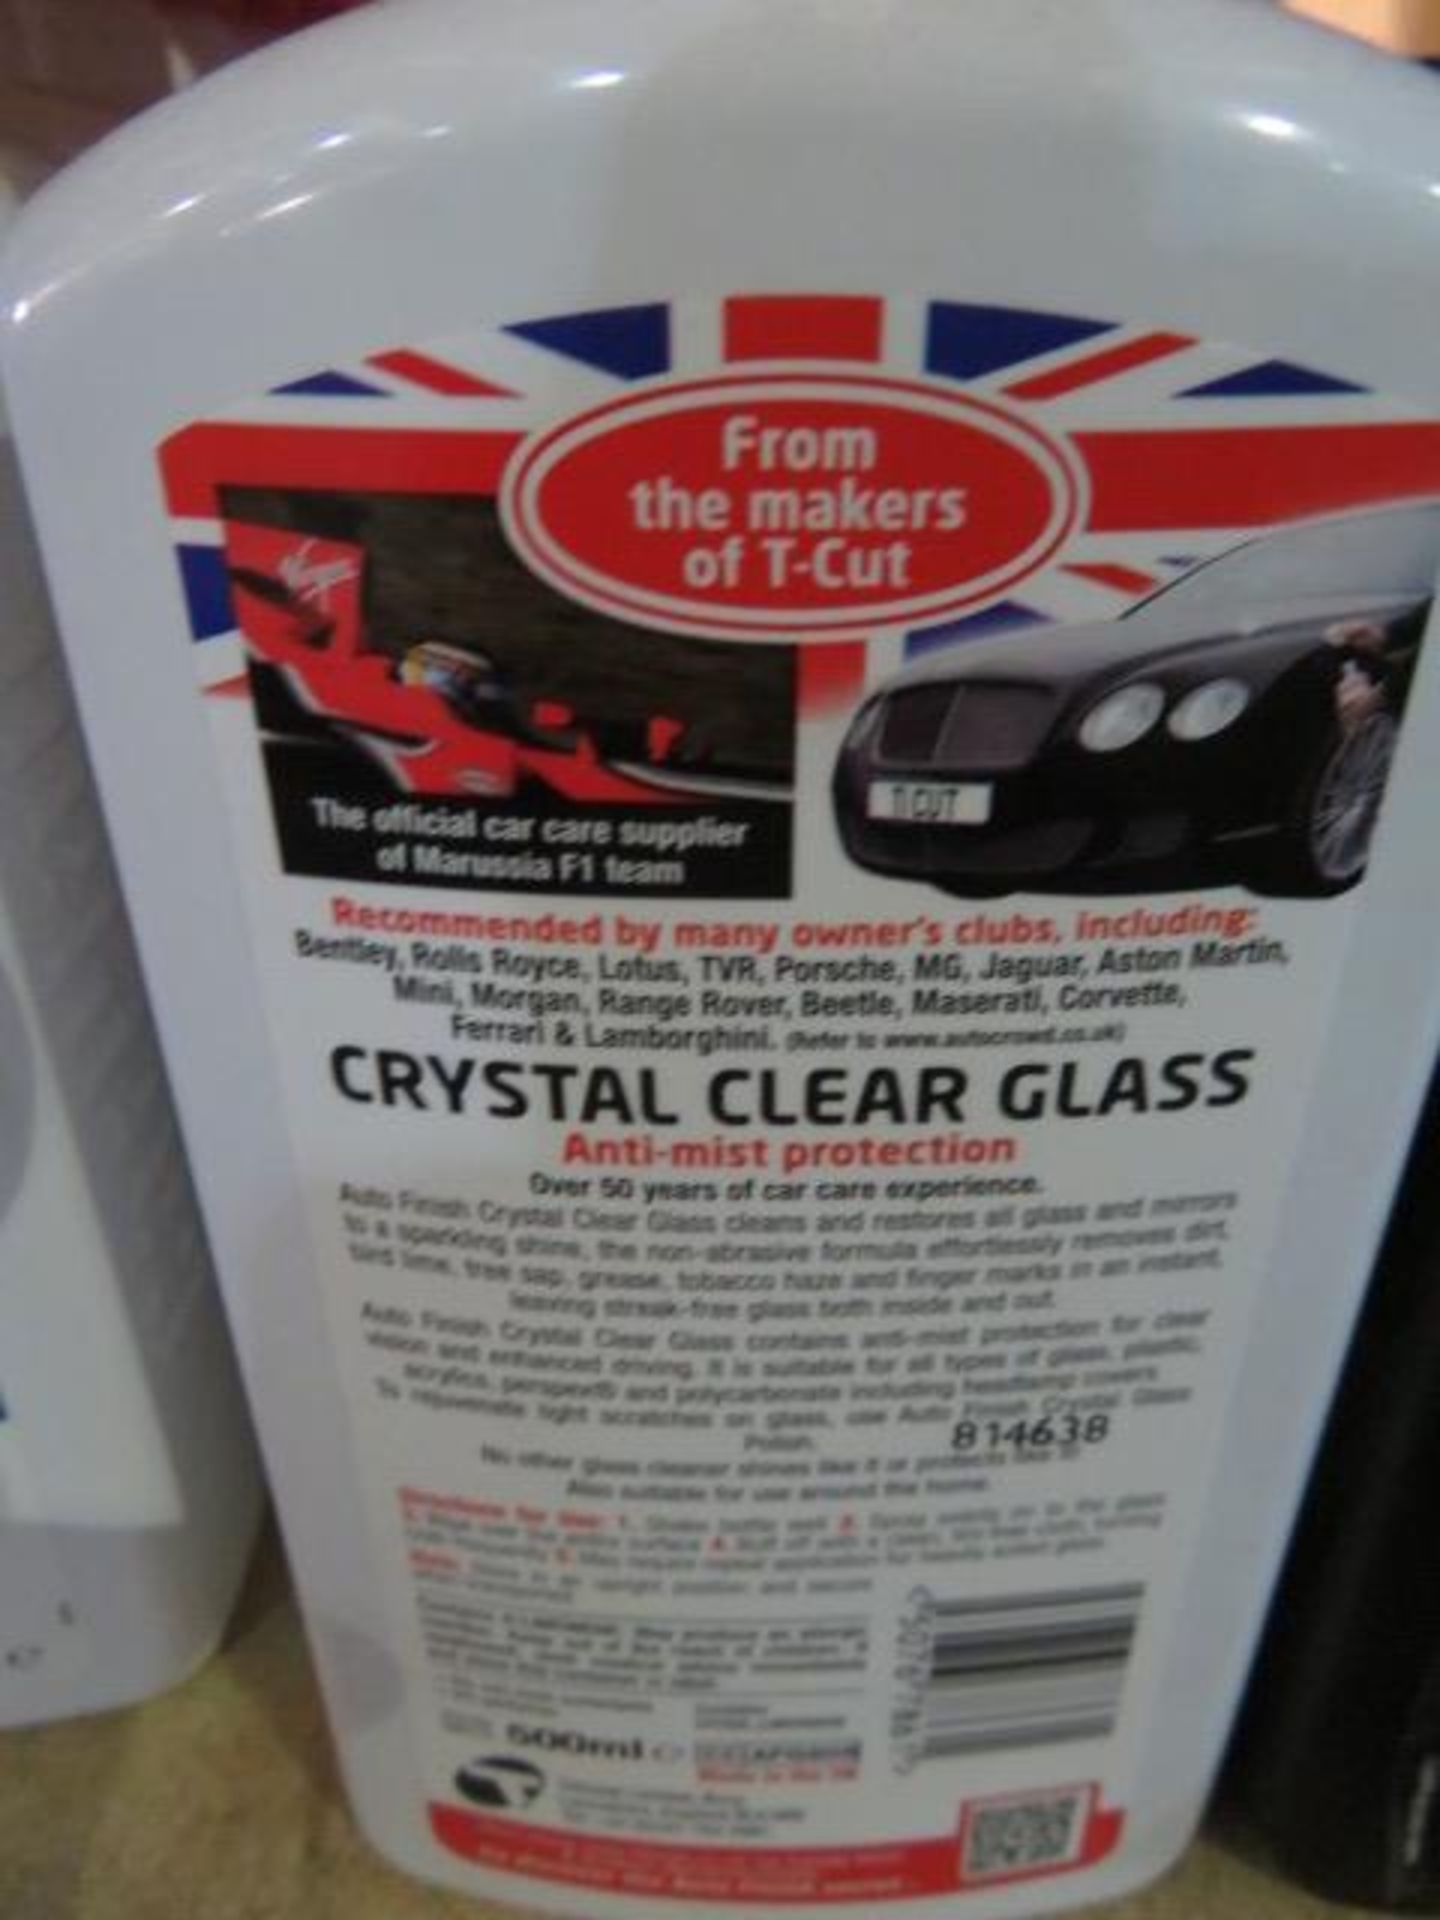 12 x Auto Finish Crystal Clear Glass 500ML. UK DELIVERY AVAILABLE FROM £14 PLUS VAT - HUGE PRO... - Image 2 of 2